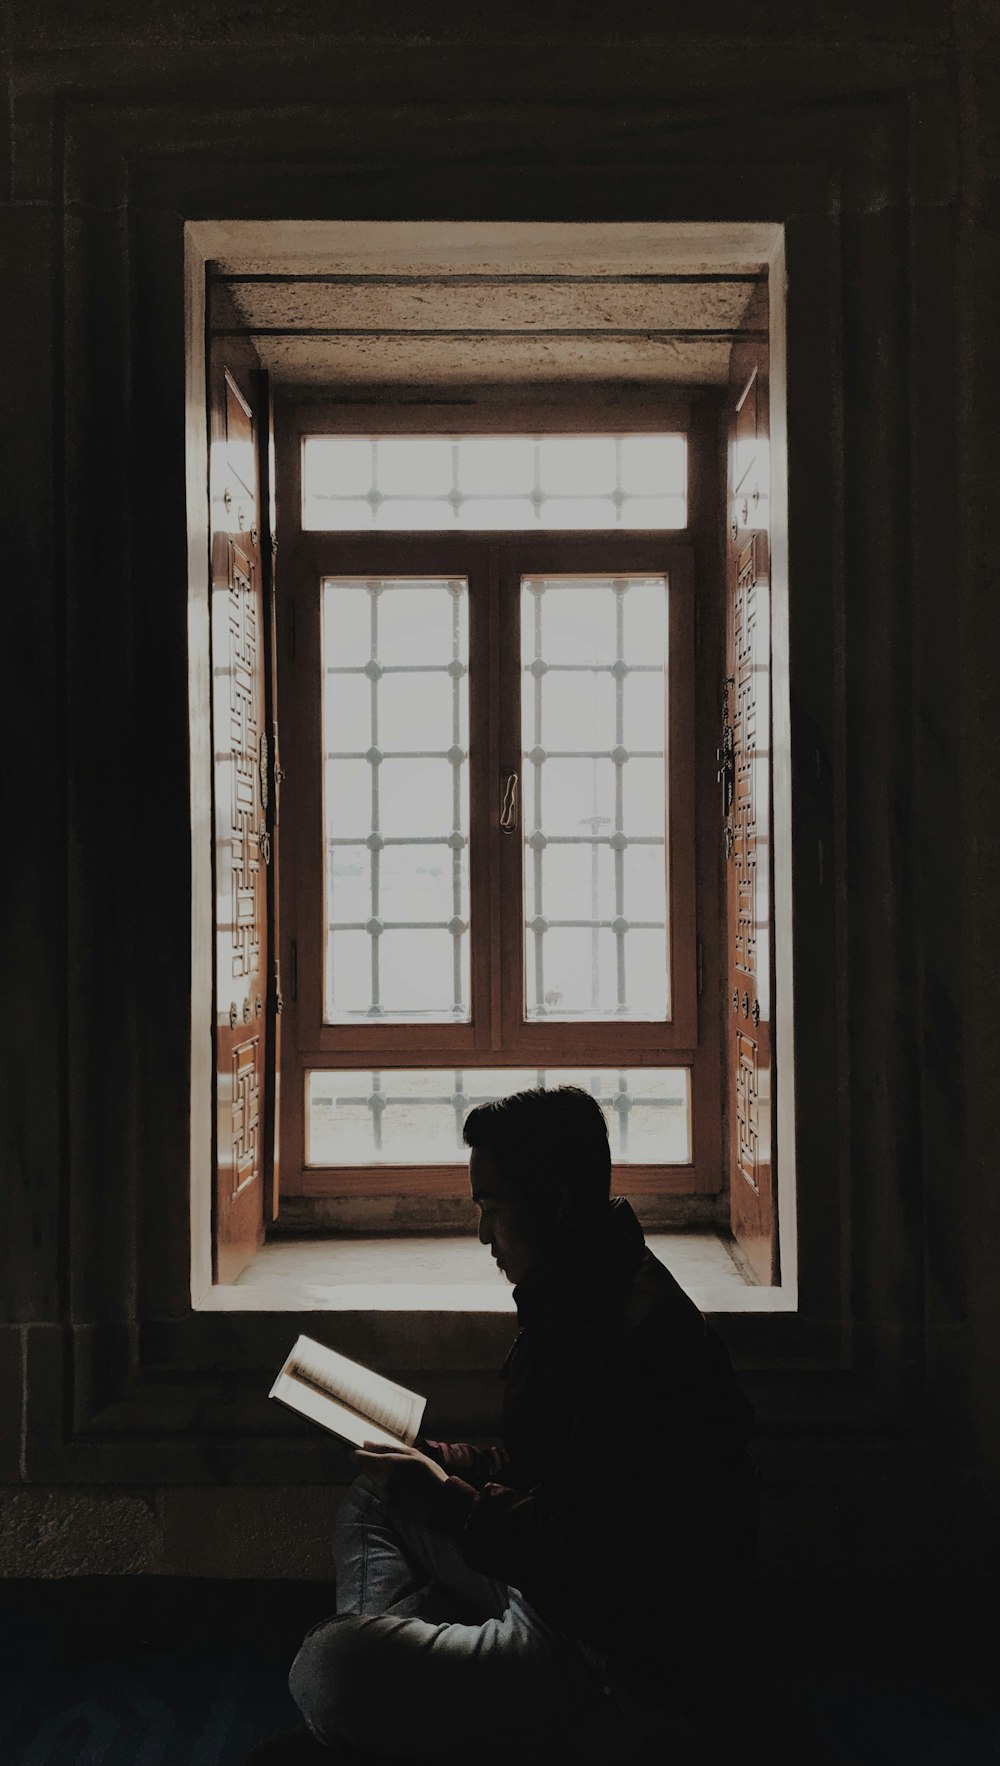 silhouette of man sitting on chair looking at the window